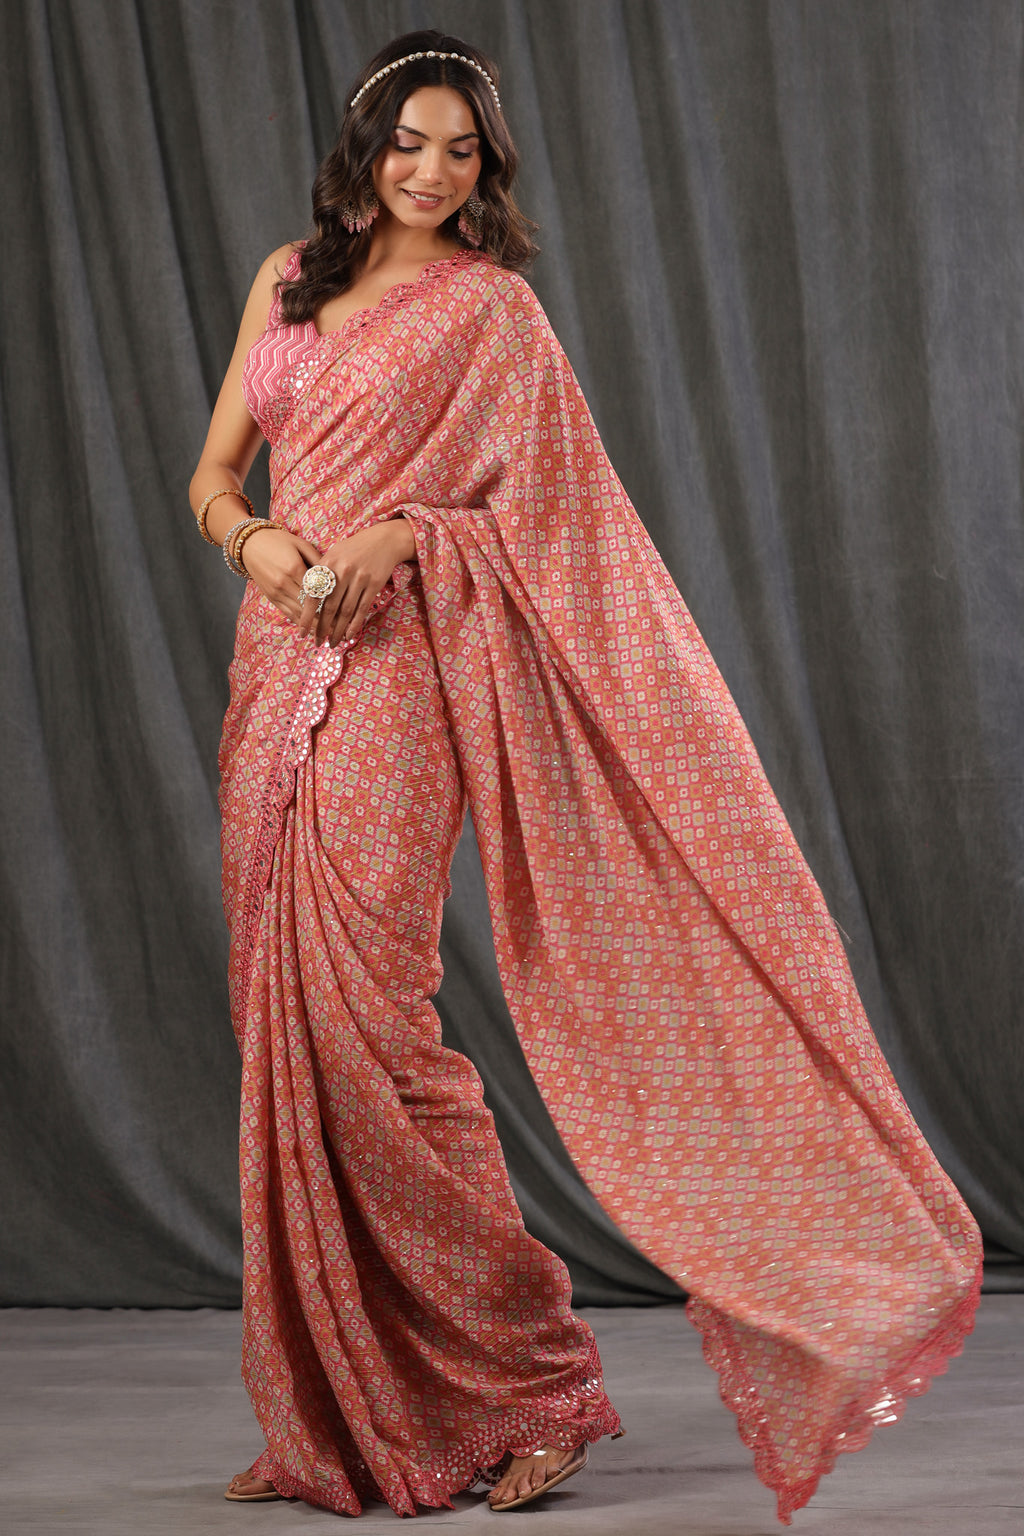 Buy pink printed crepe georgette saree online in USA with scalloped border. Make a fashion statement at weddings with stunning designer sarees, embroidered sarees with blouse, wedding sarees, handloom sarees from Pure Elegance Indian fashion store in USA.-full view